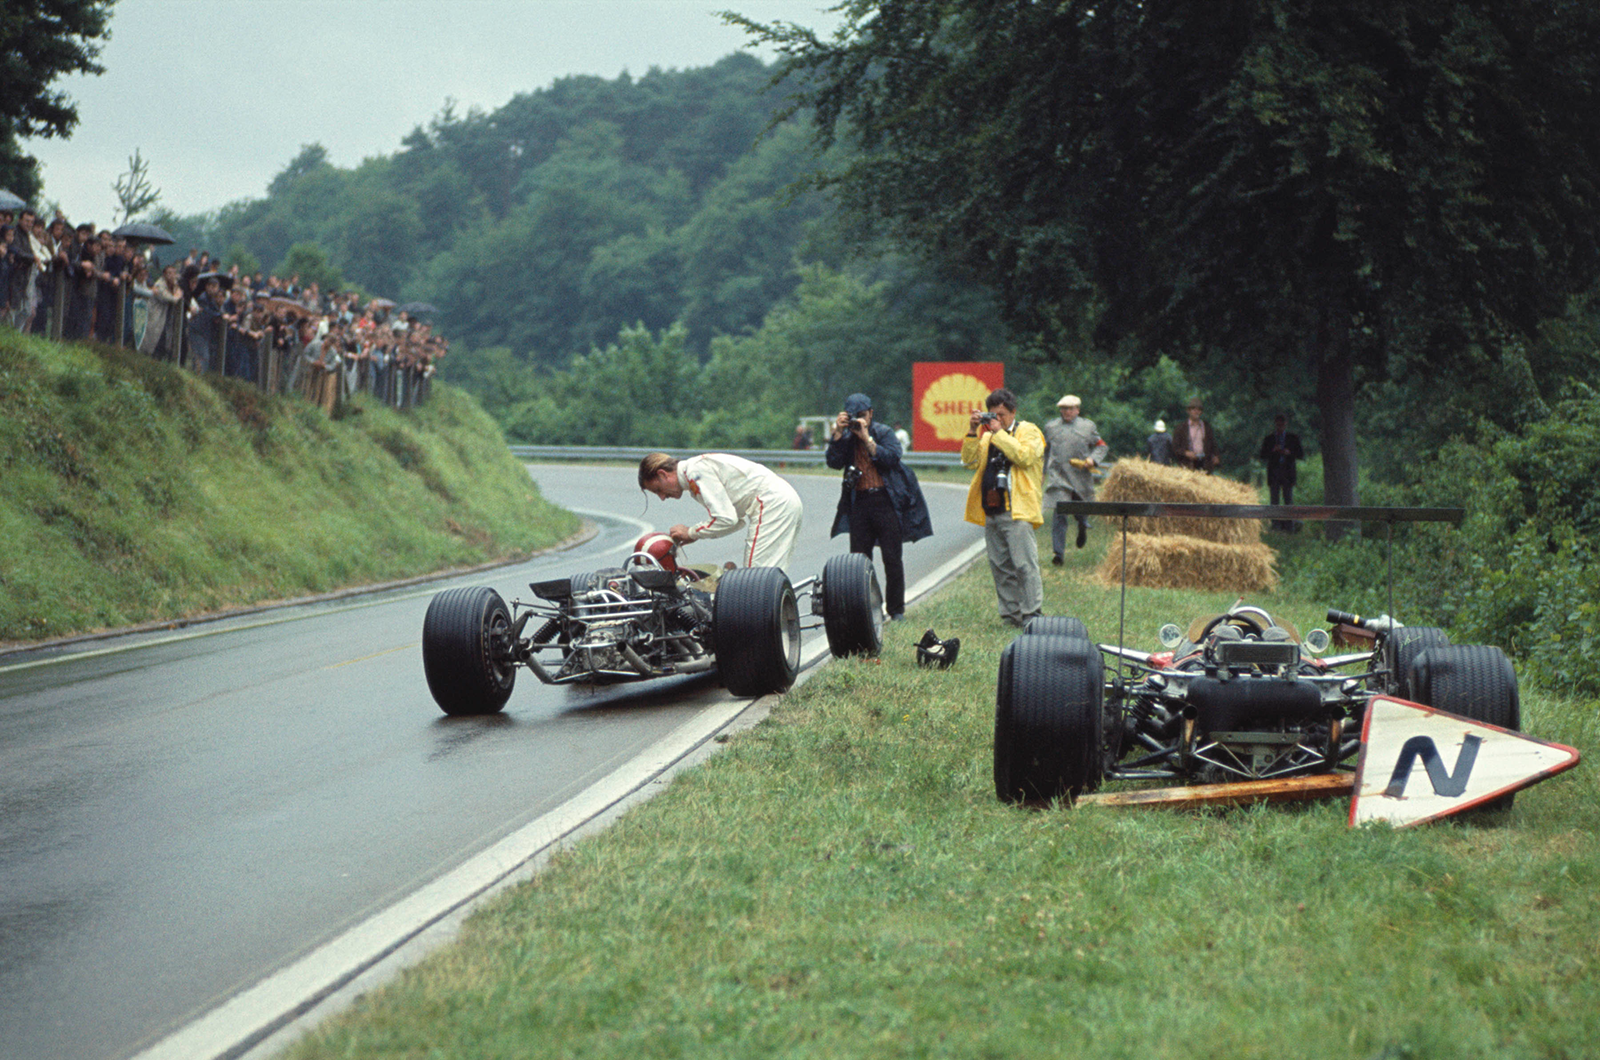 Graham Hill and the season that changed F1